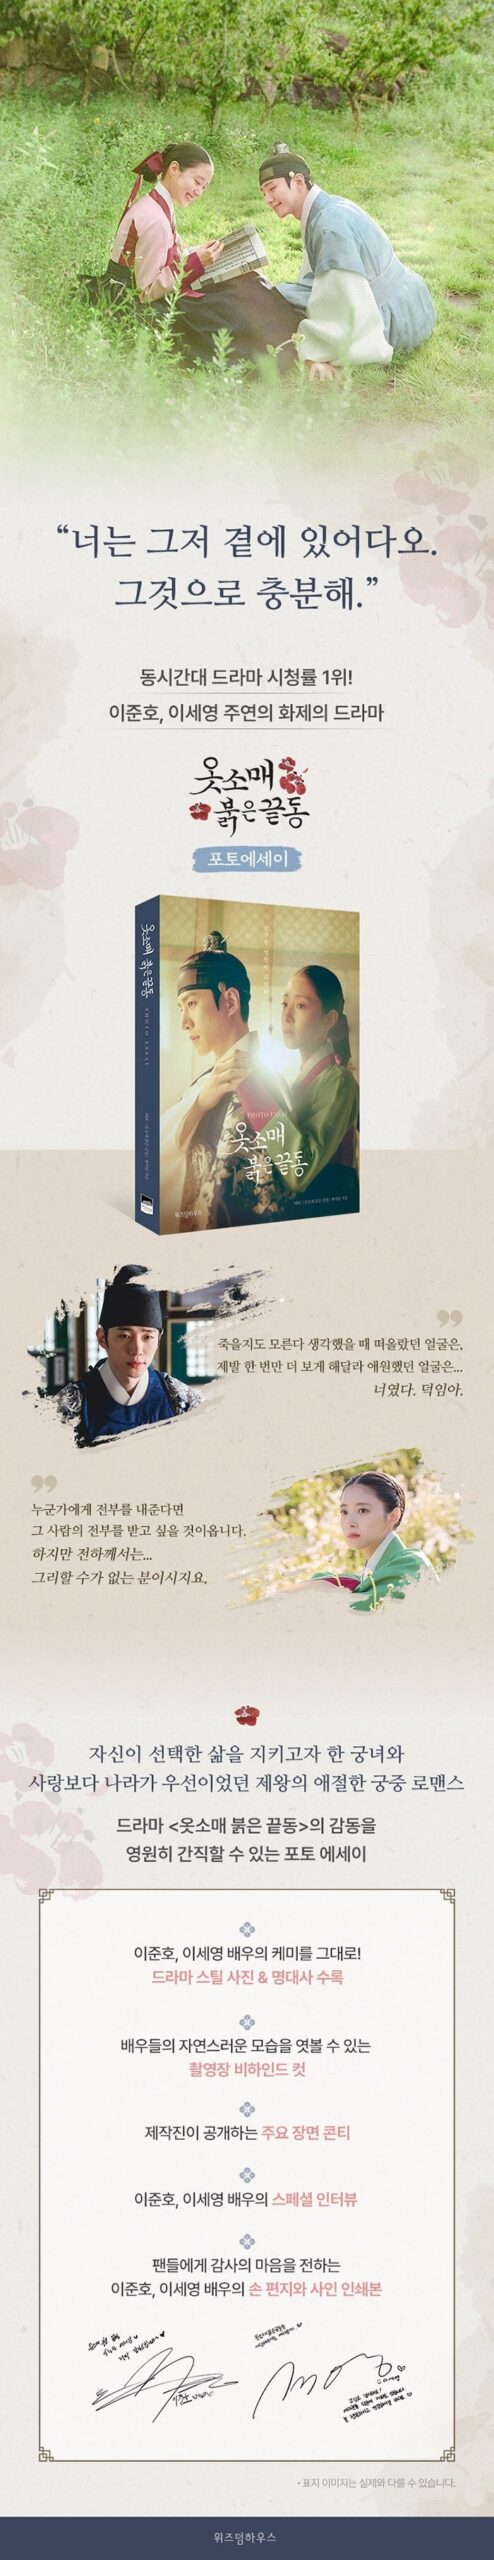 The Red Sleeve Photo Essay OST